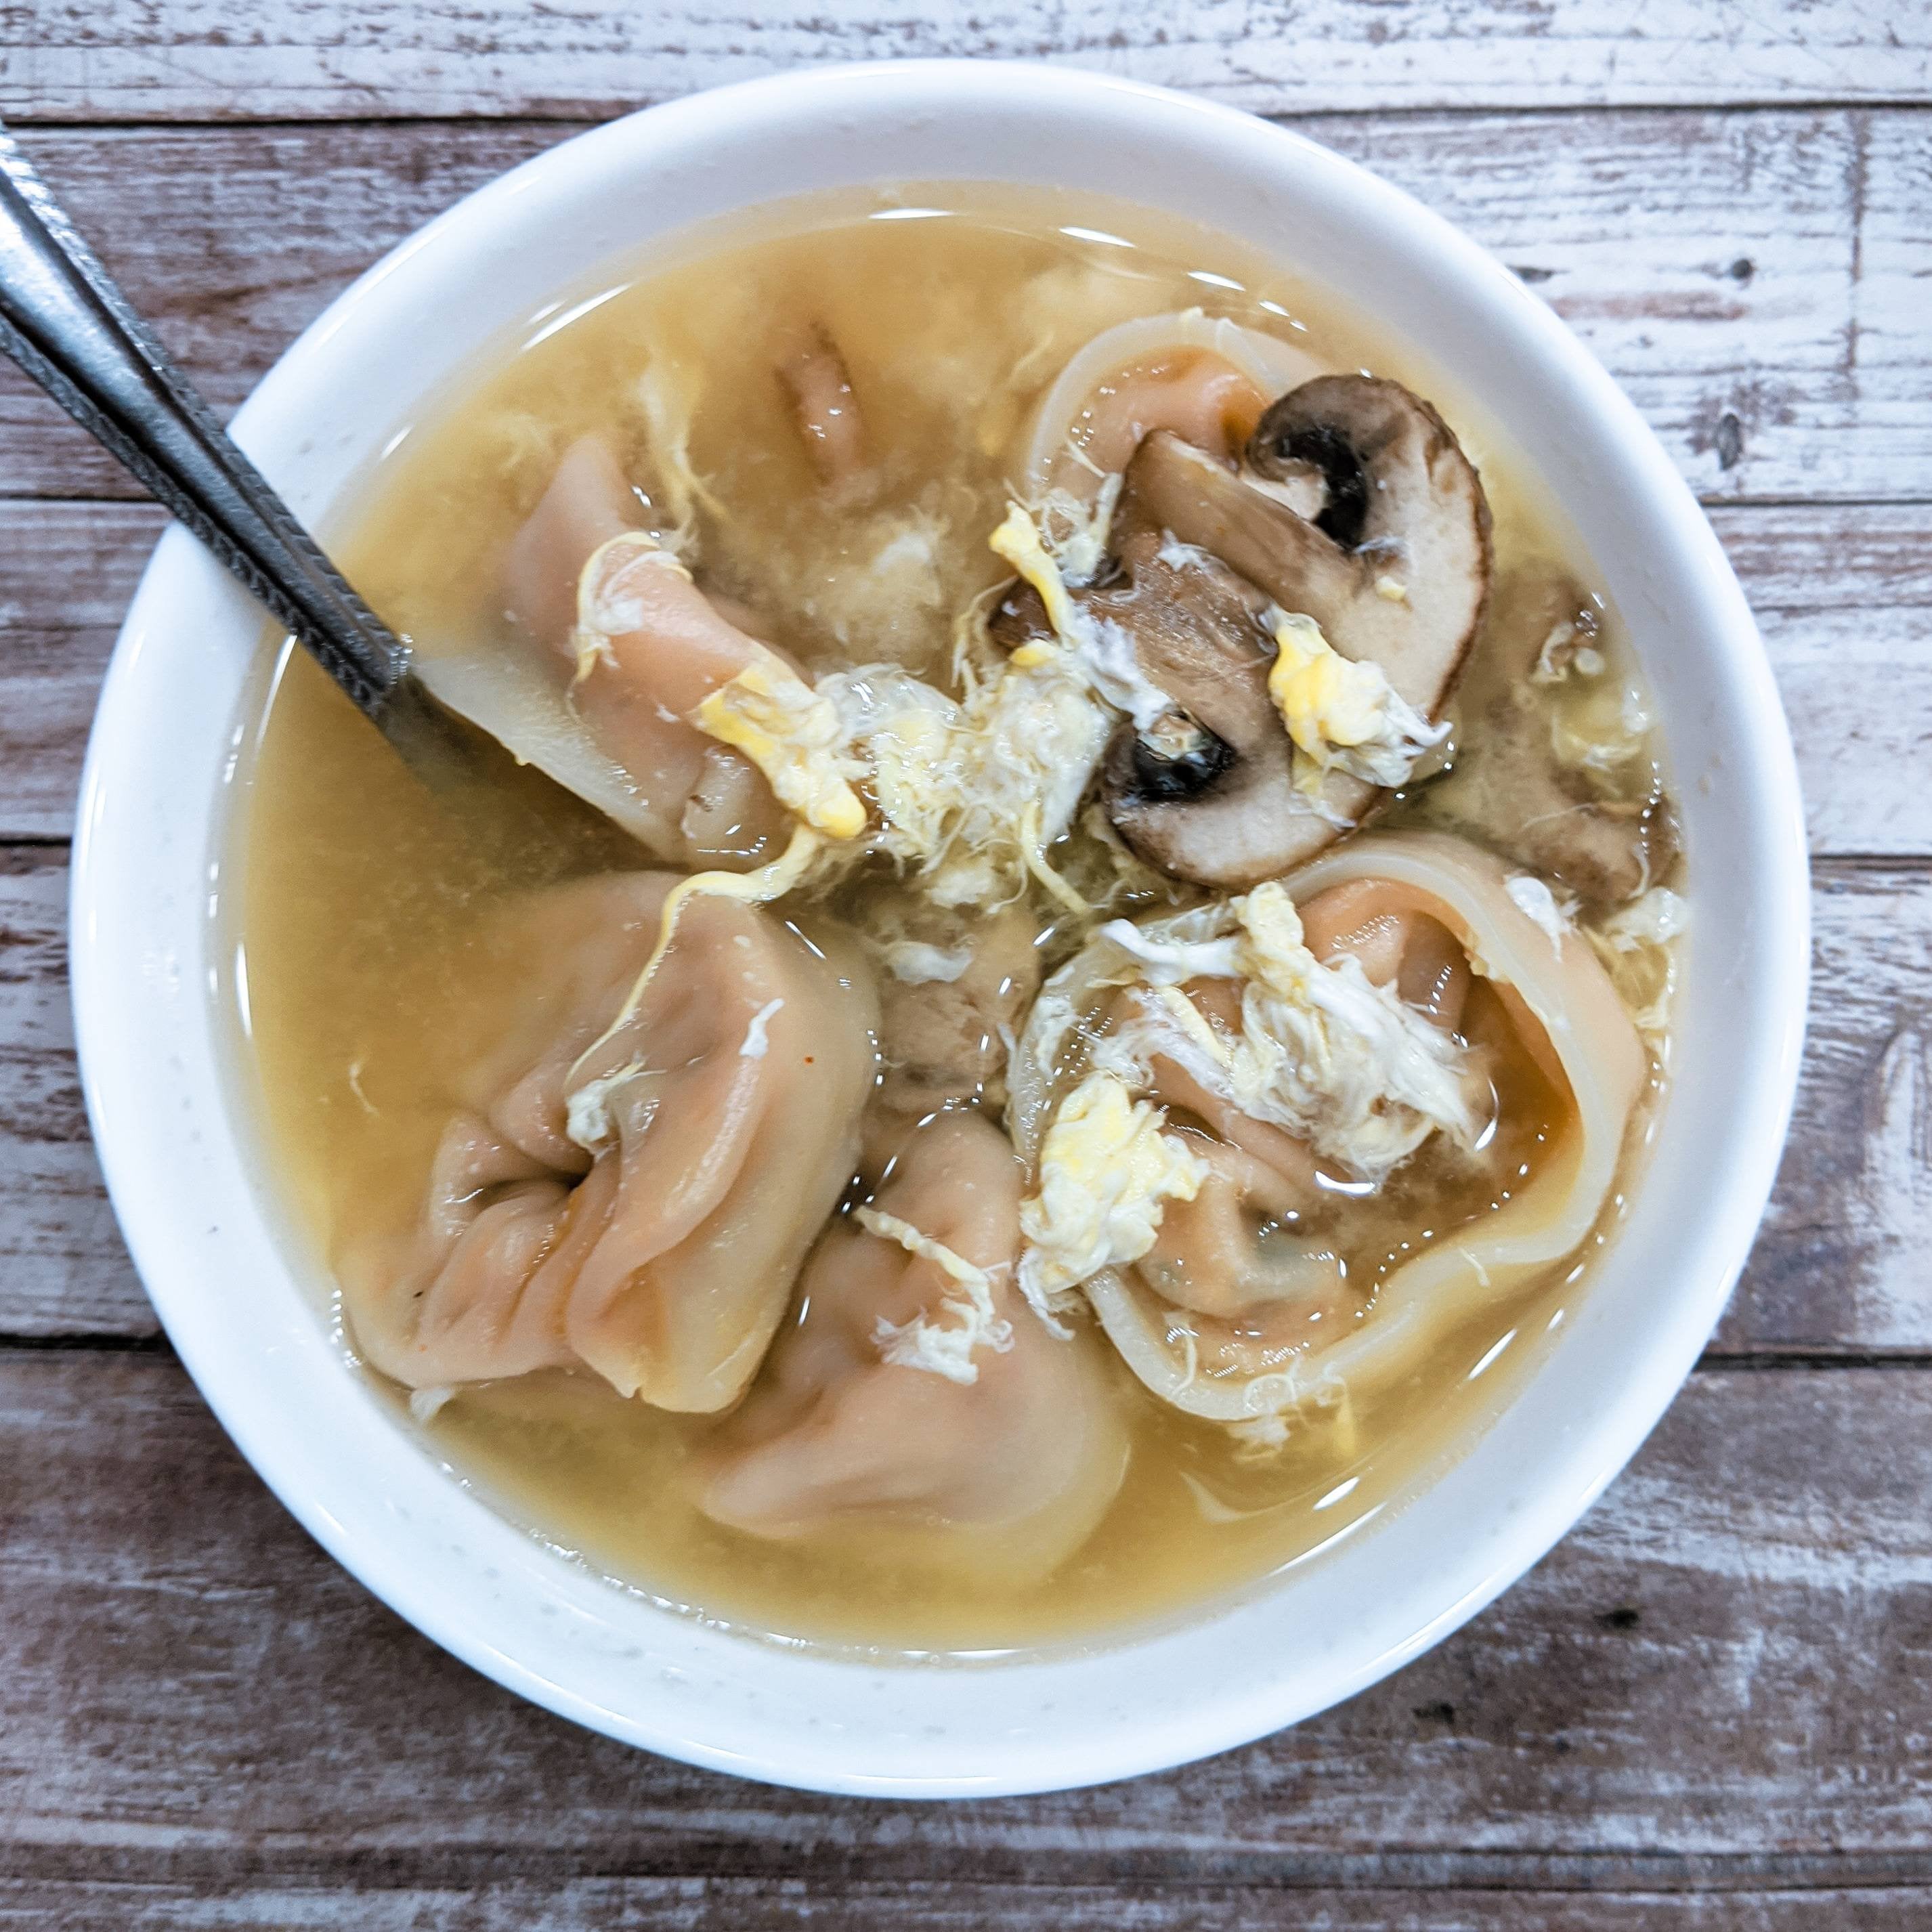 340 Calorie Egg Drop Soup With Mushrooms And Kimchi Dumplings Dining And Cooking